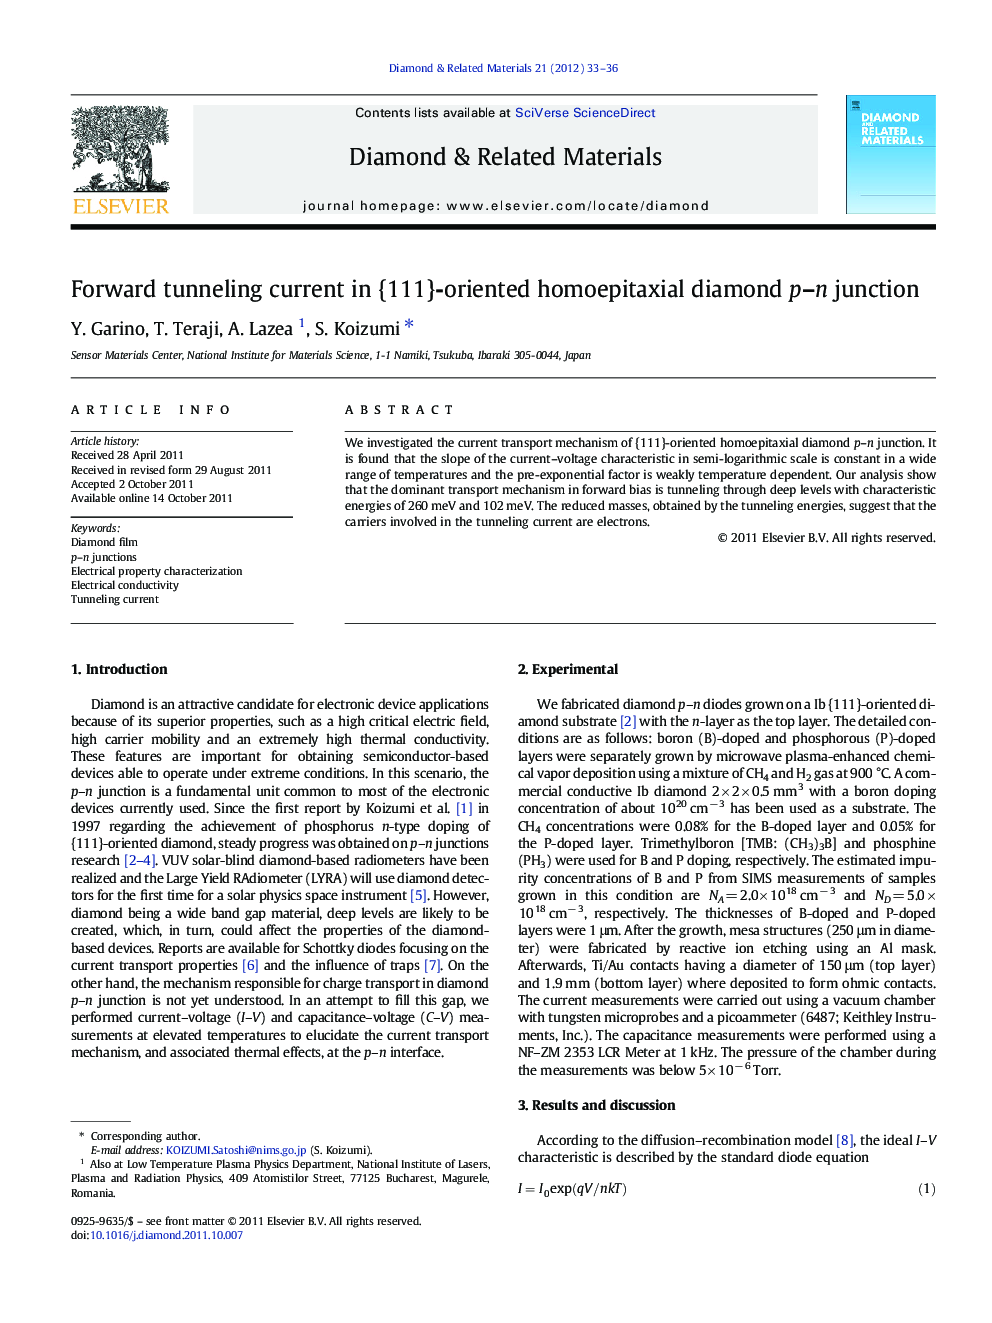 Forward tunneling current in {111}-oriented homoepitaxial diamond p–n junction